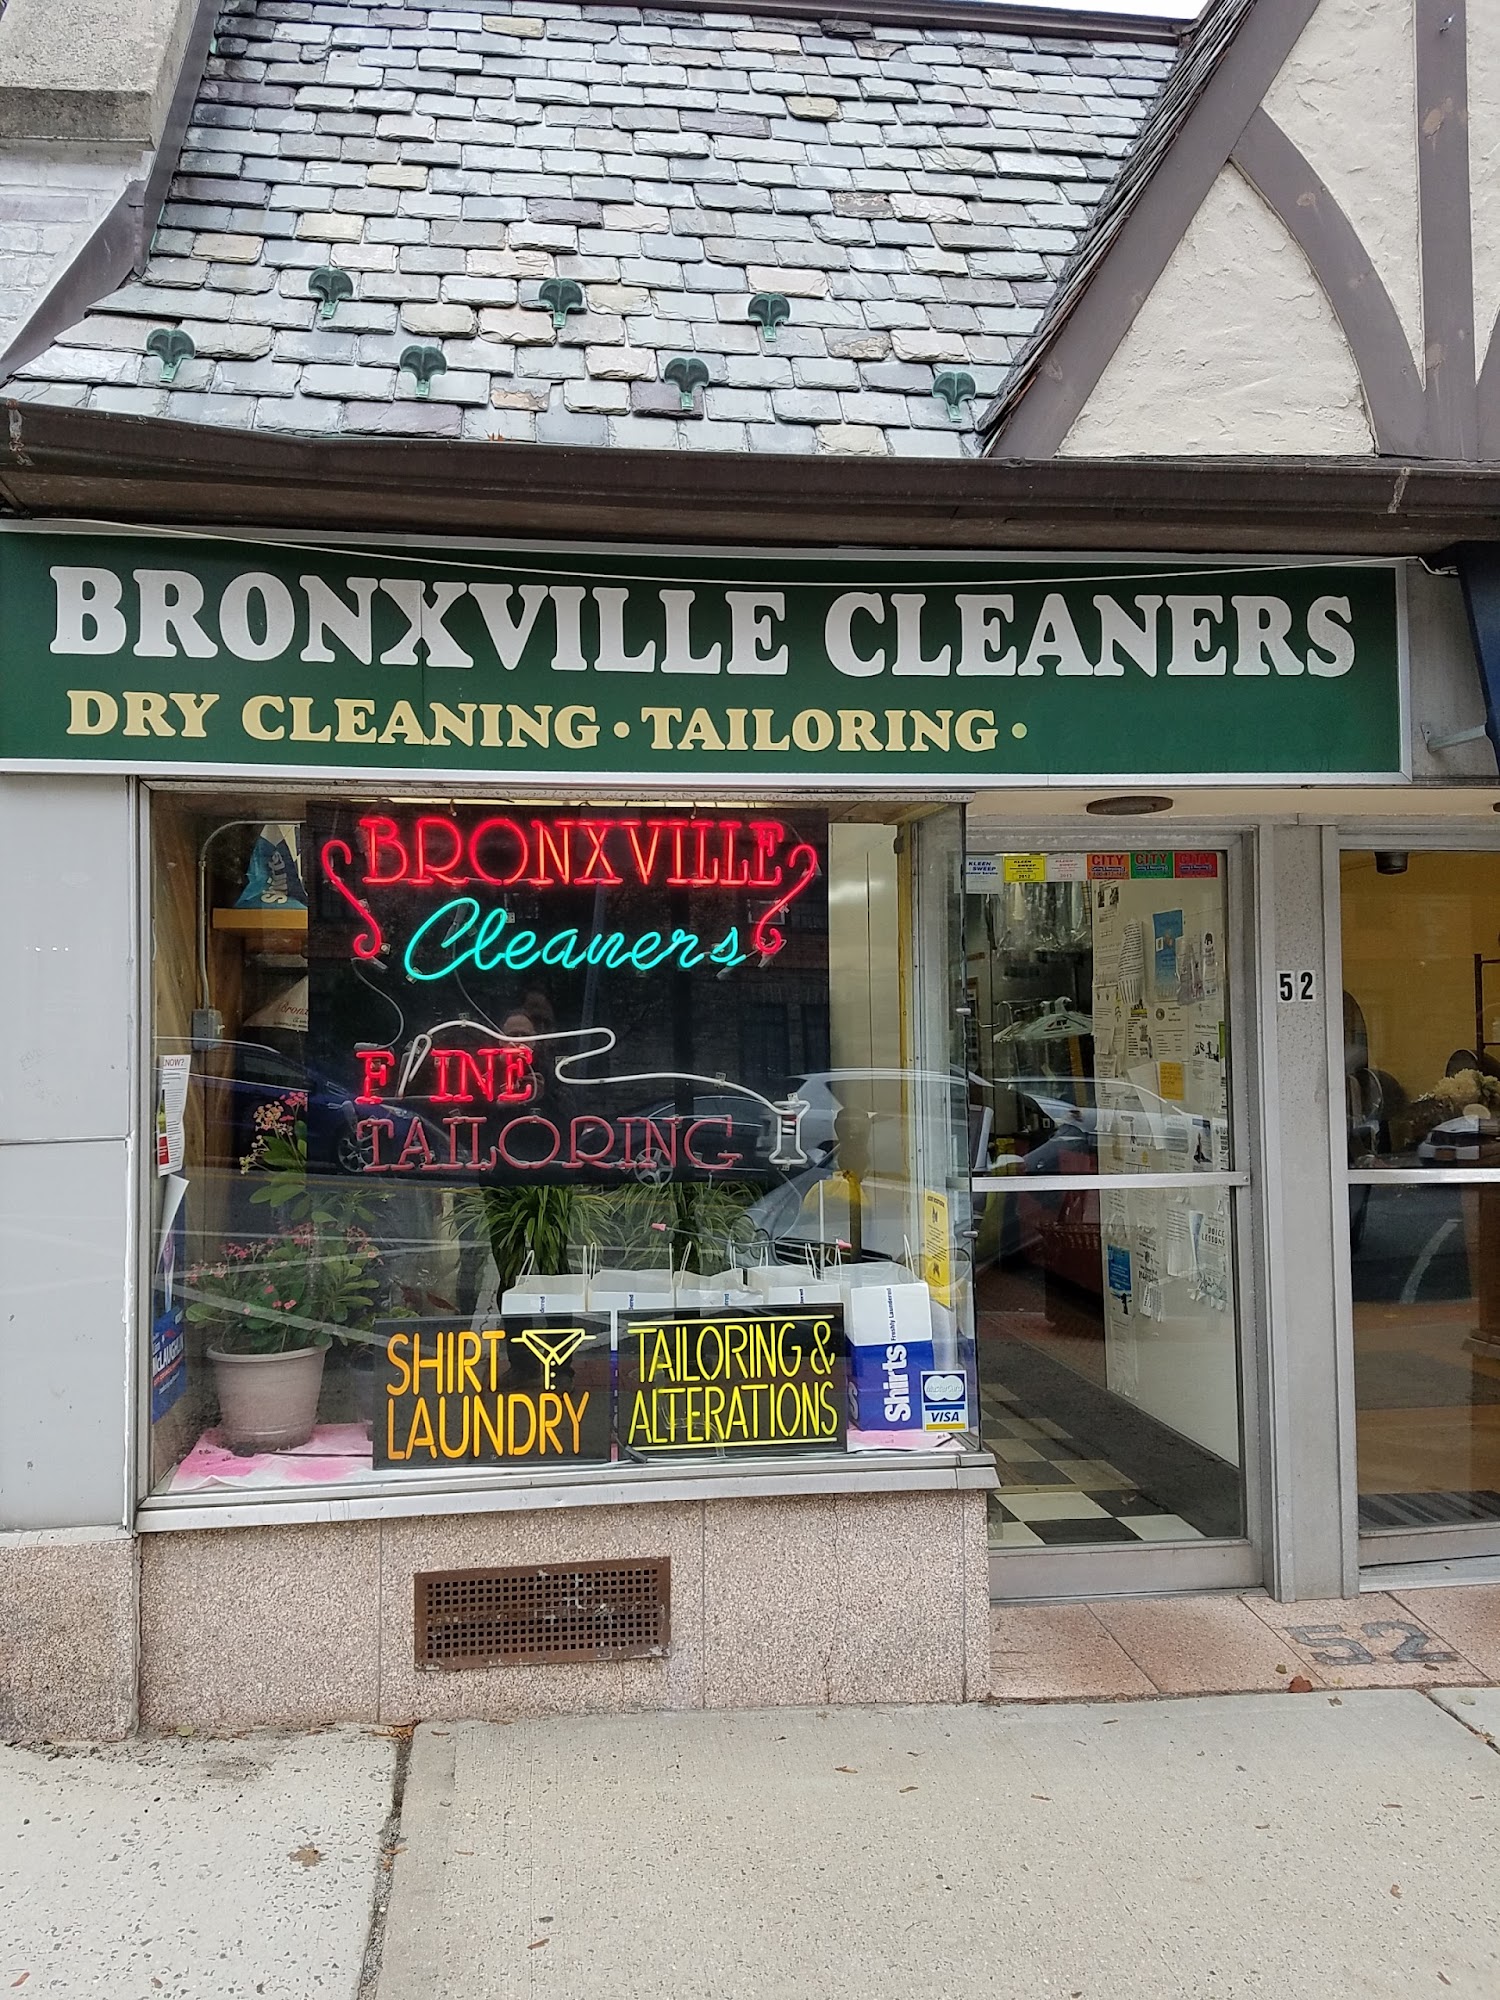 Bronxville Cleaners & Tailoring